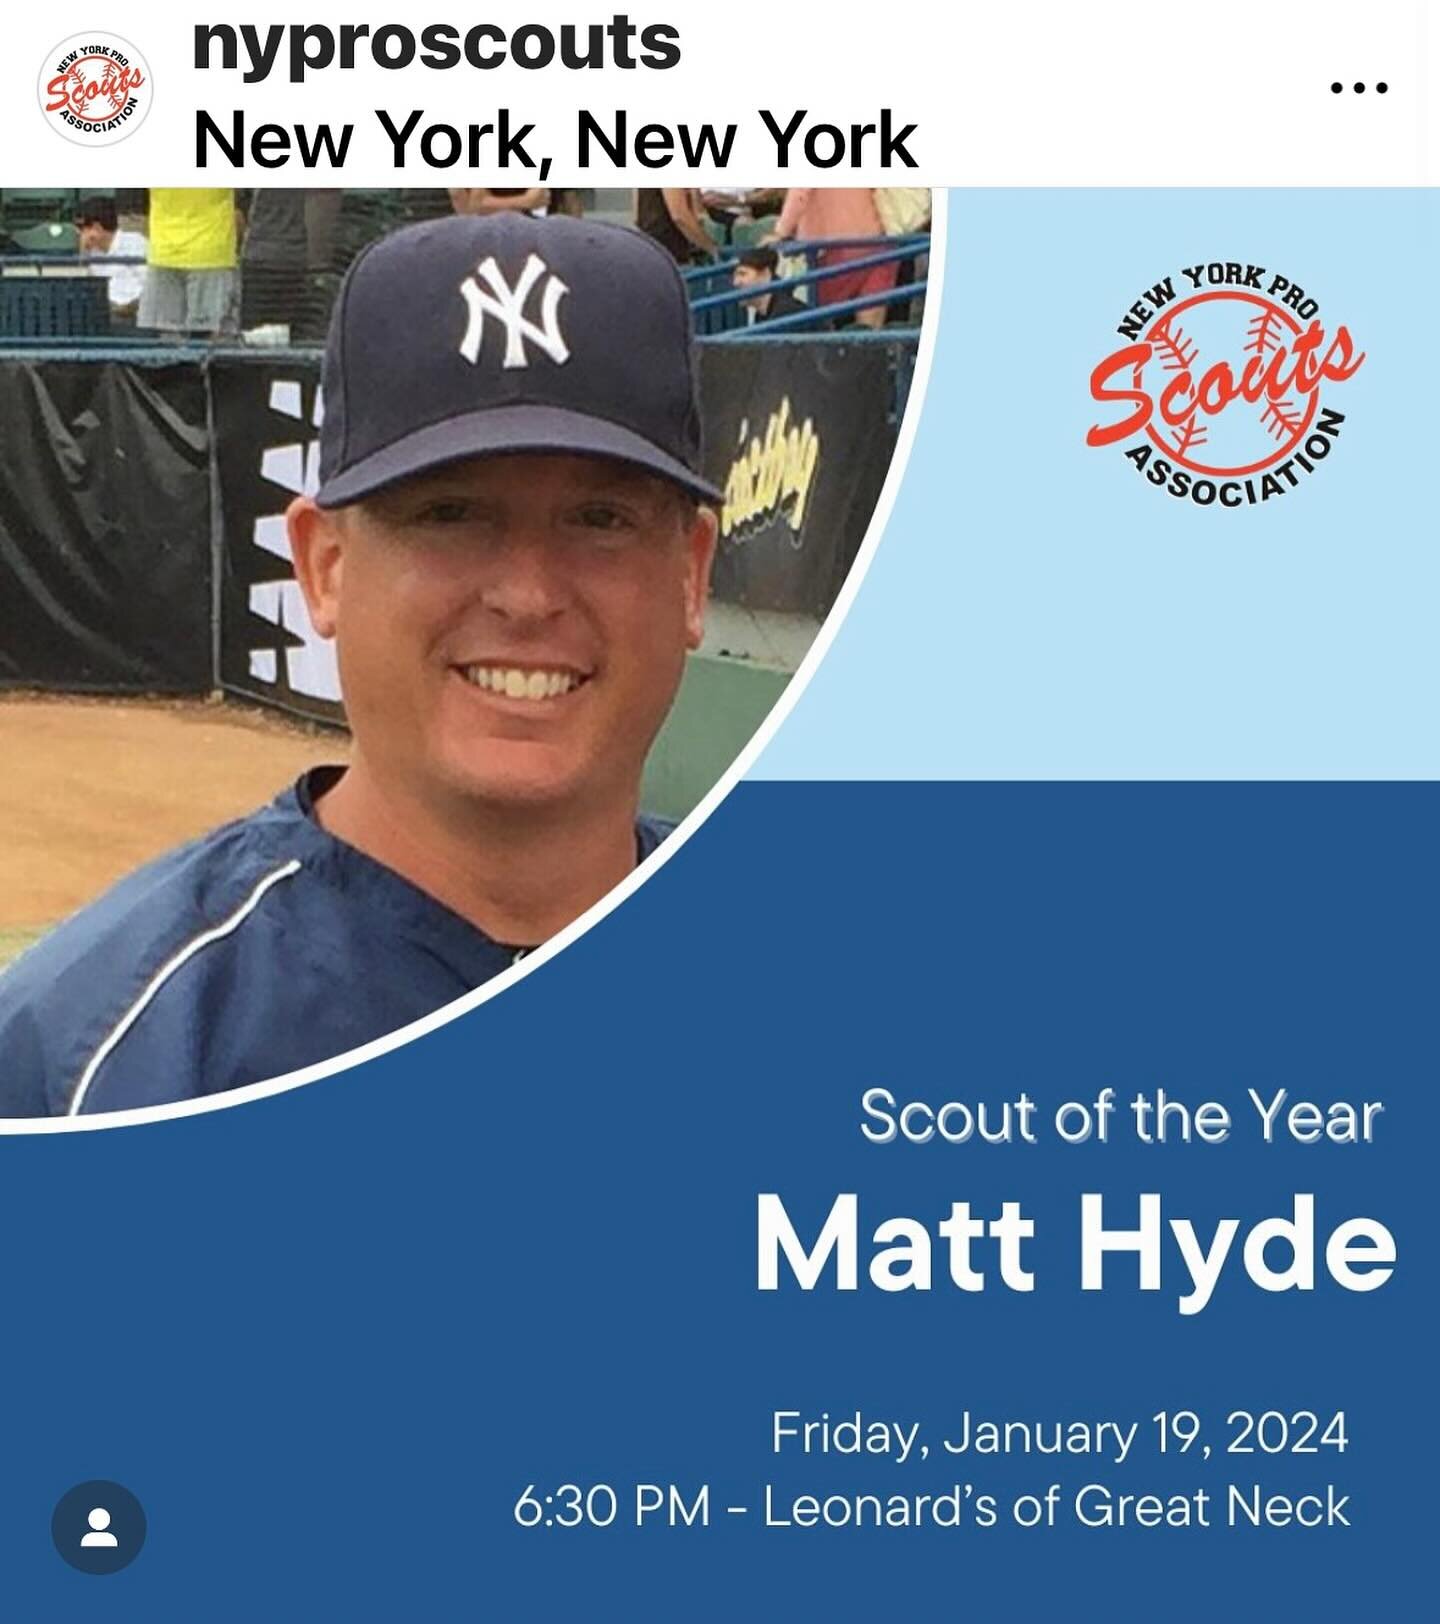 Congratulations to Matt Hyde on a well deserved and hard earned honor. The New York Professional Scouts Association Scout of the Year!!! I am excited to celebrate this achievement tomorrow night of a very special friend to me and the foundation. Matt